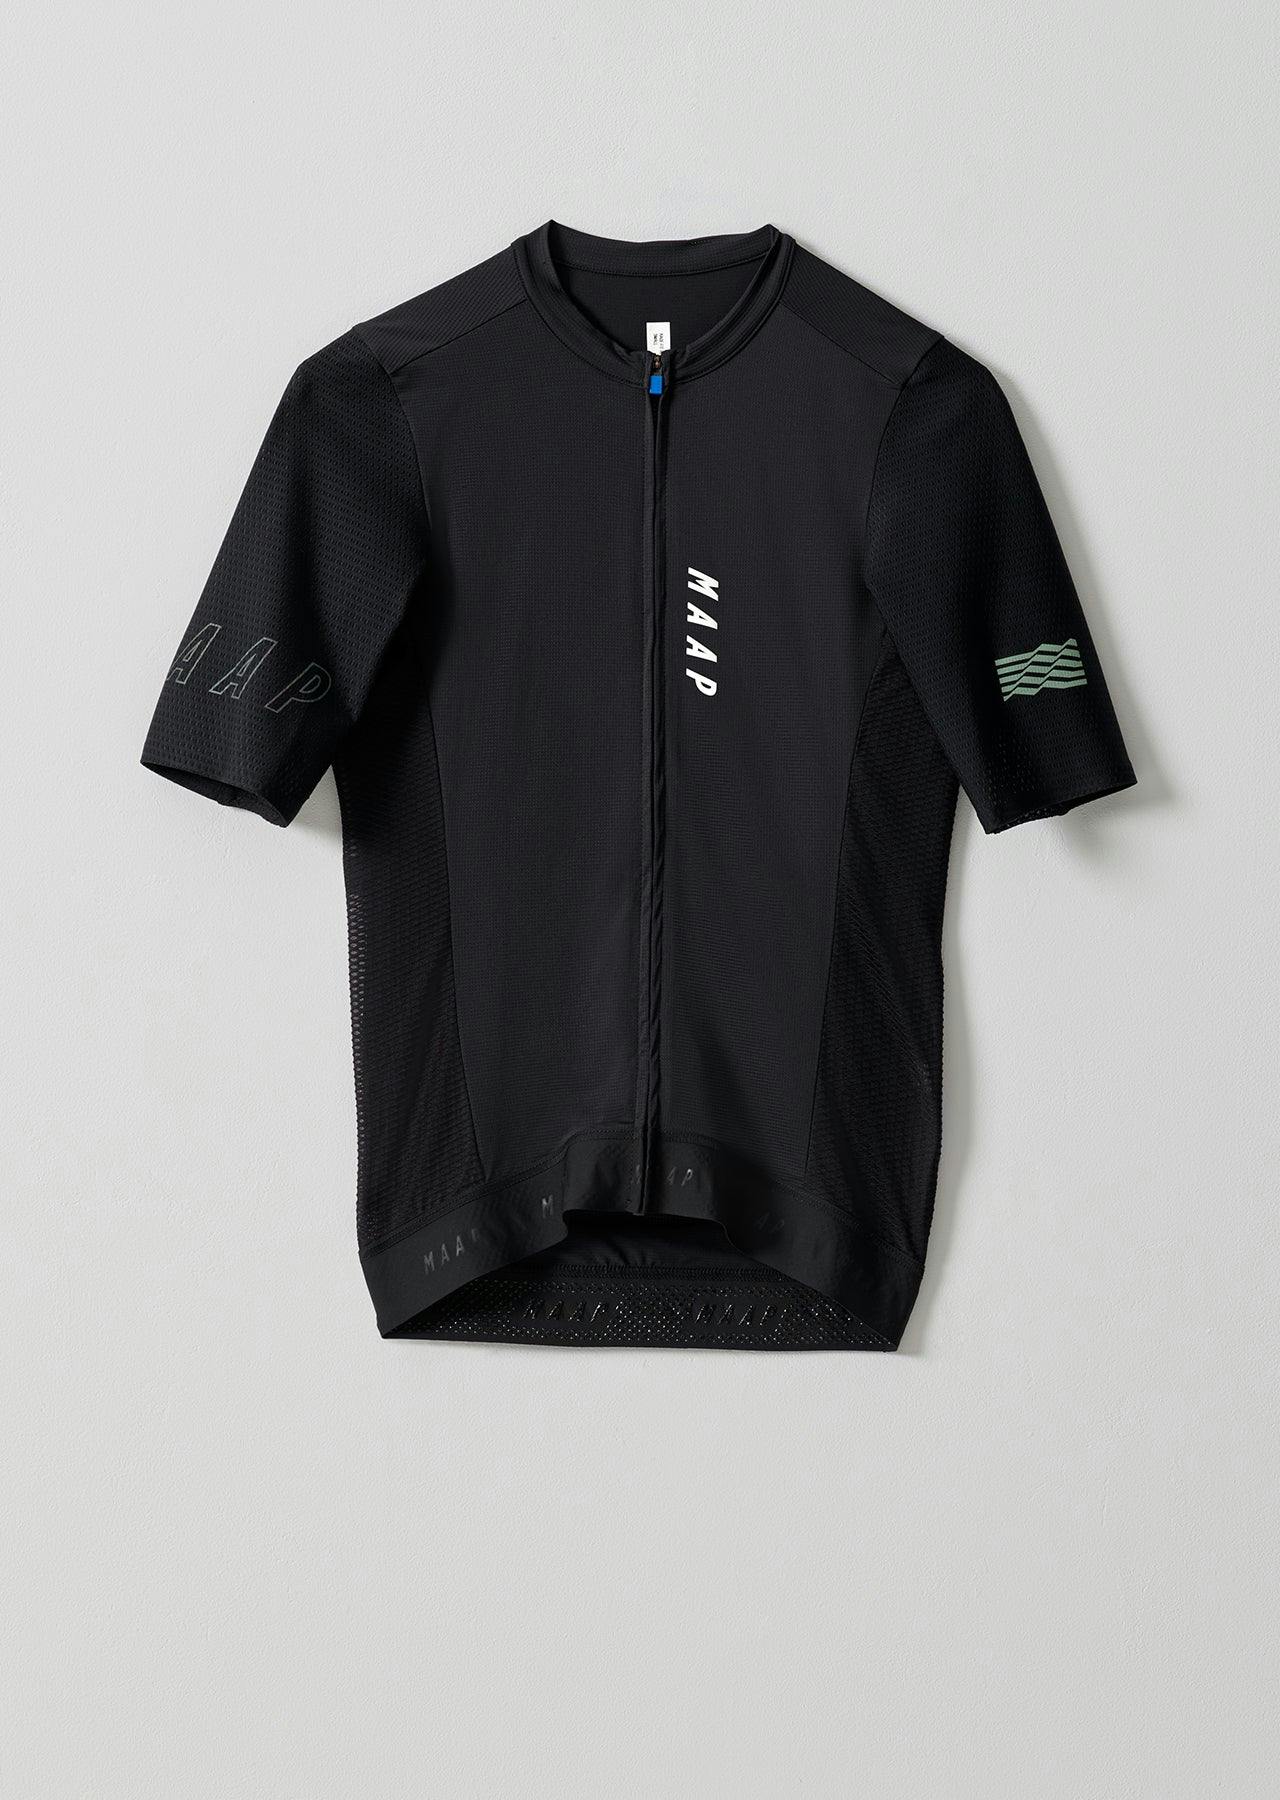 Stealth Race Fit Jersey